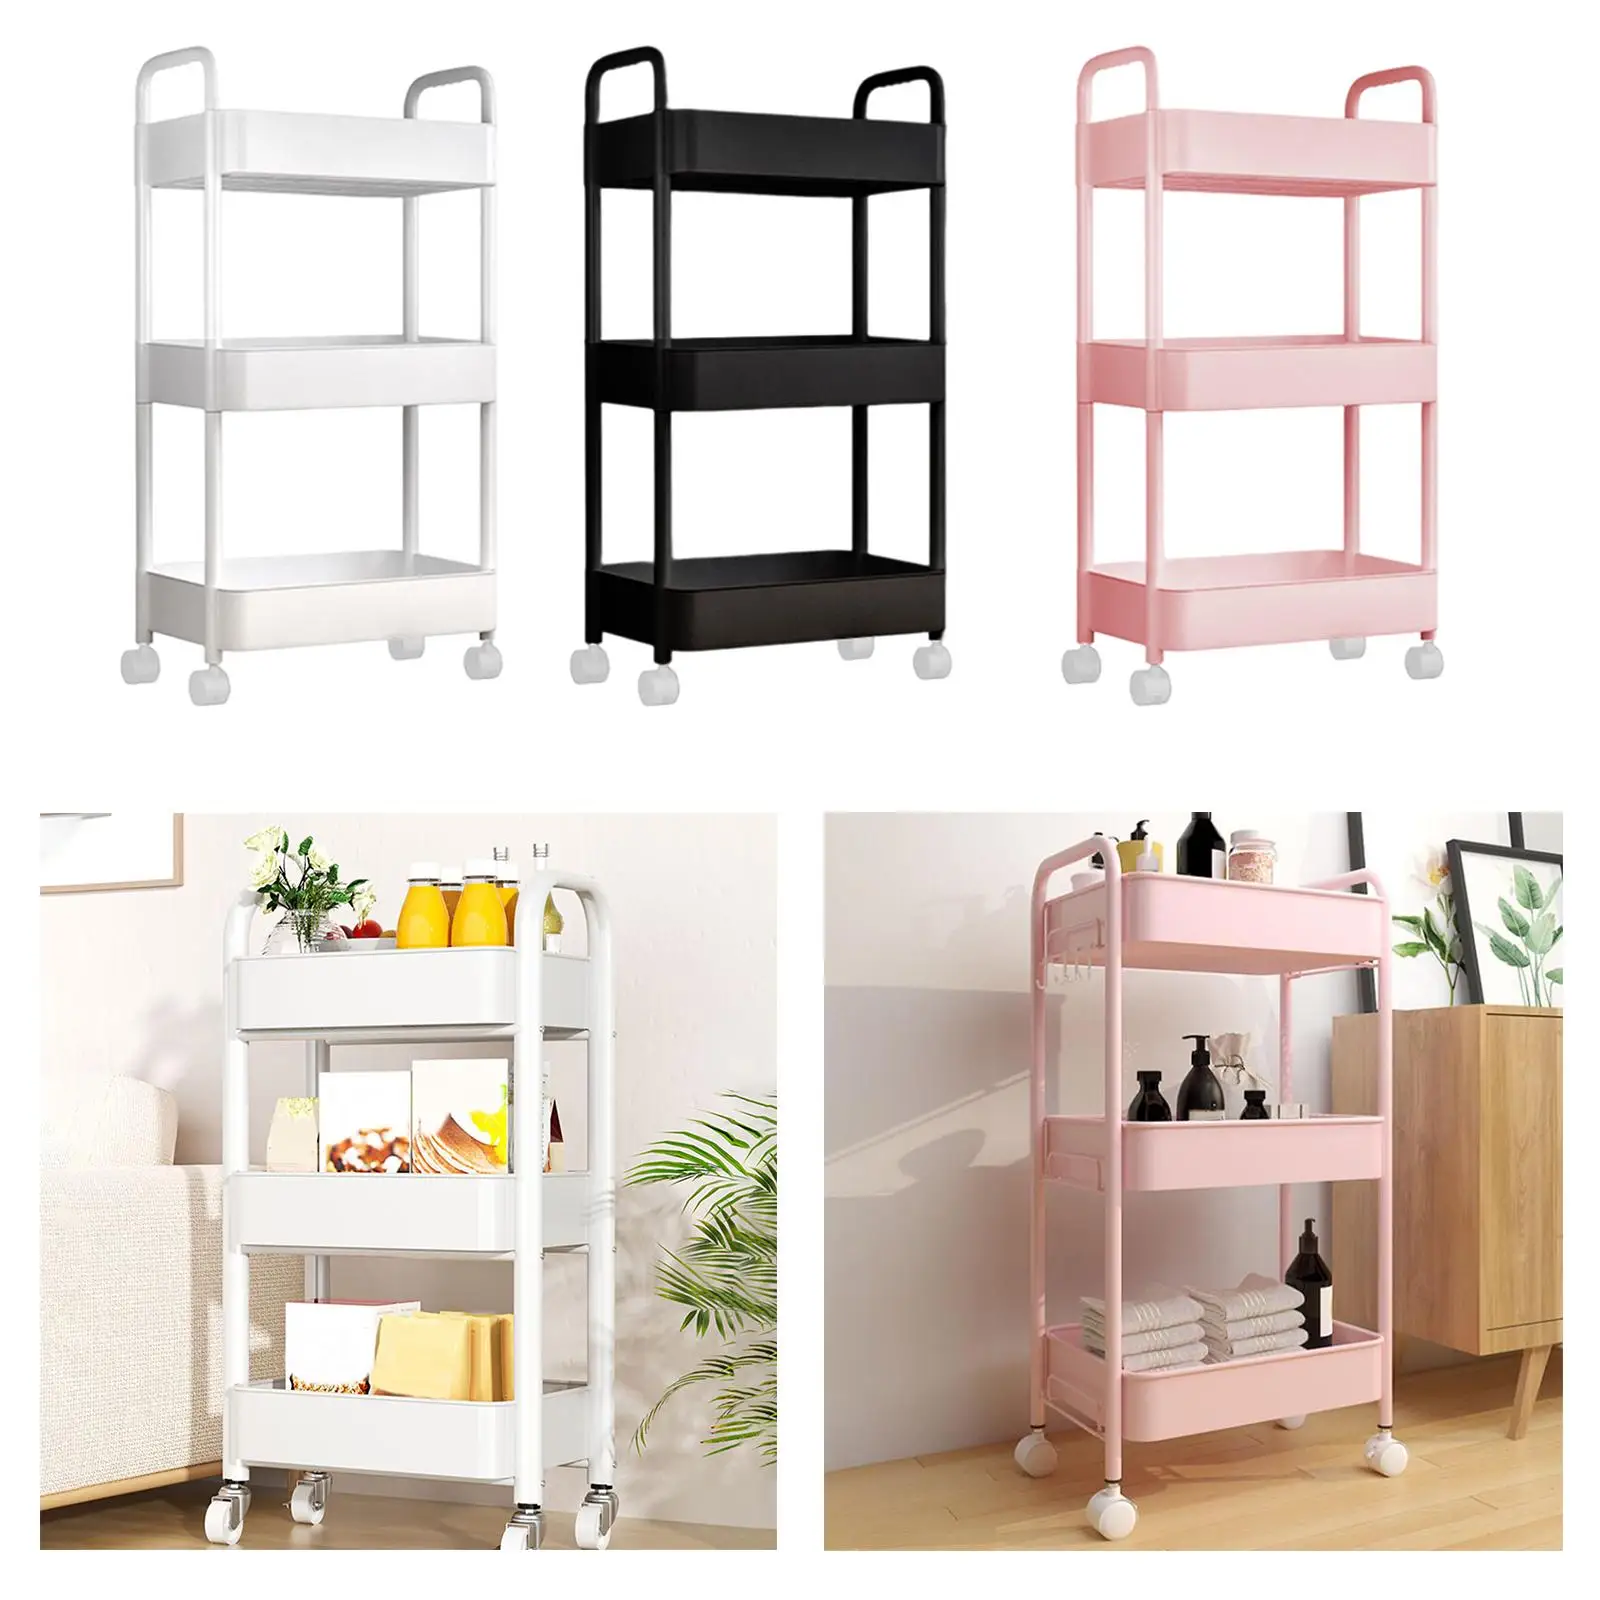 Organizer Rack Carbon Steel 3 Layer Ornament Wear Resistant for Home Bedroom